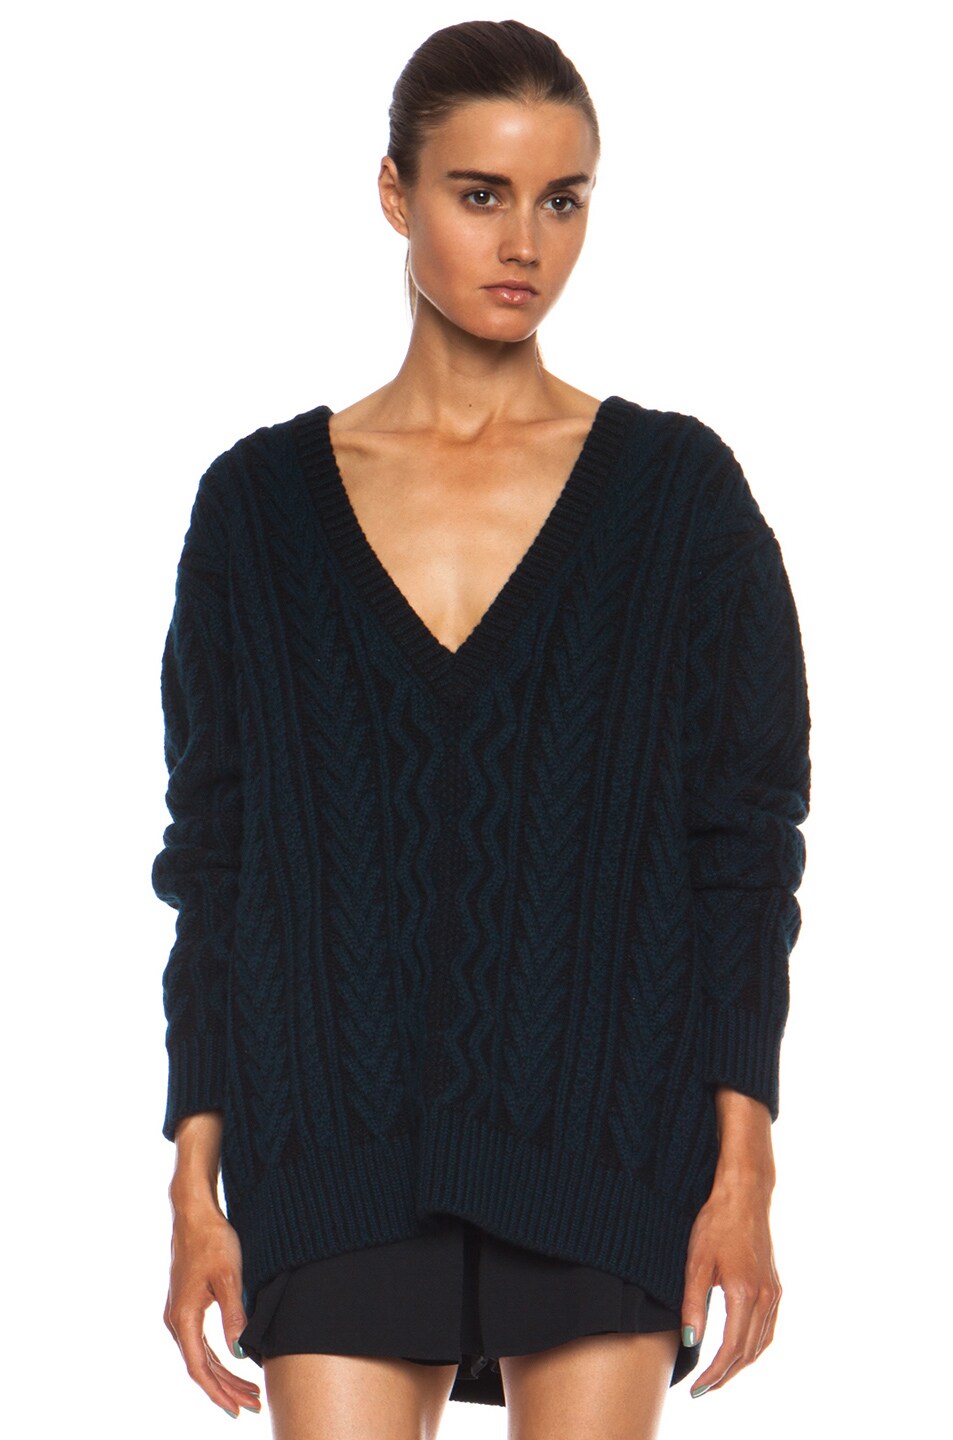 Proenza Schouler Two Tone Cable-Knit Cashmere Sweater in Emerald ...